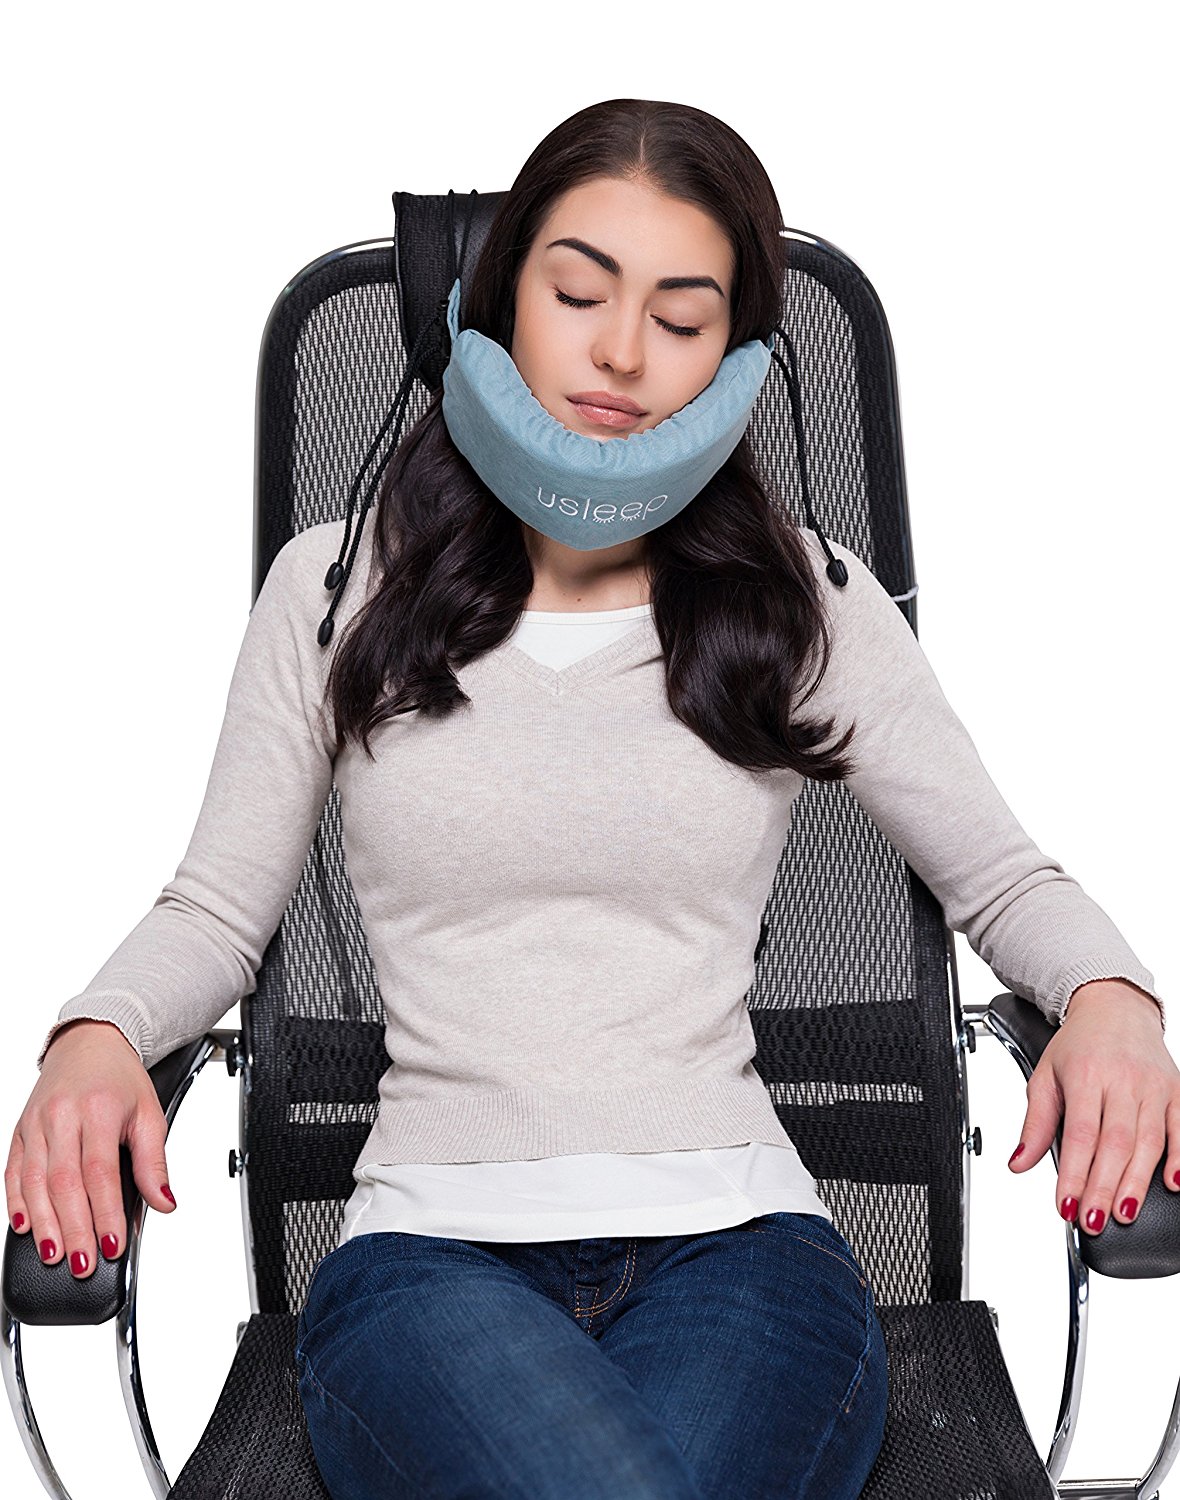 Buy Neck Pillow For Flying Online At Lowest Prices